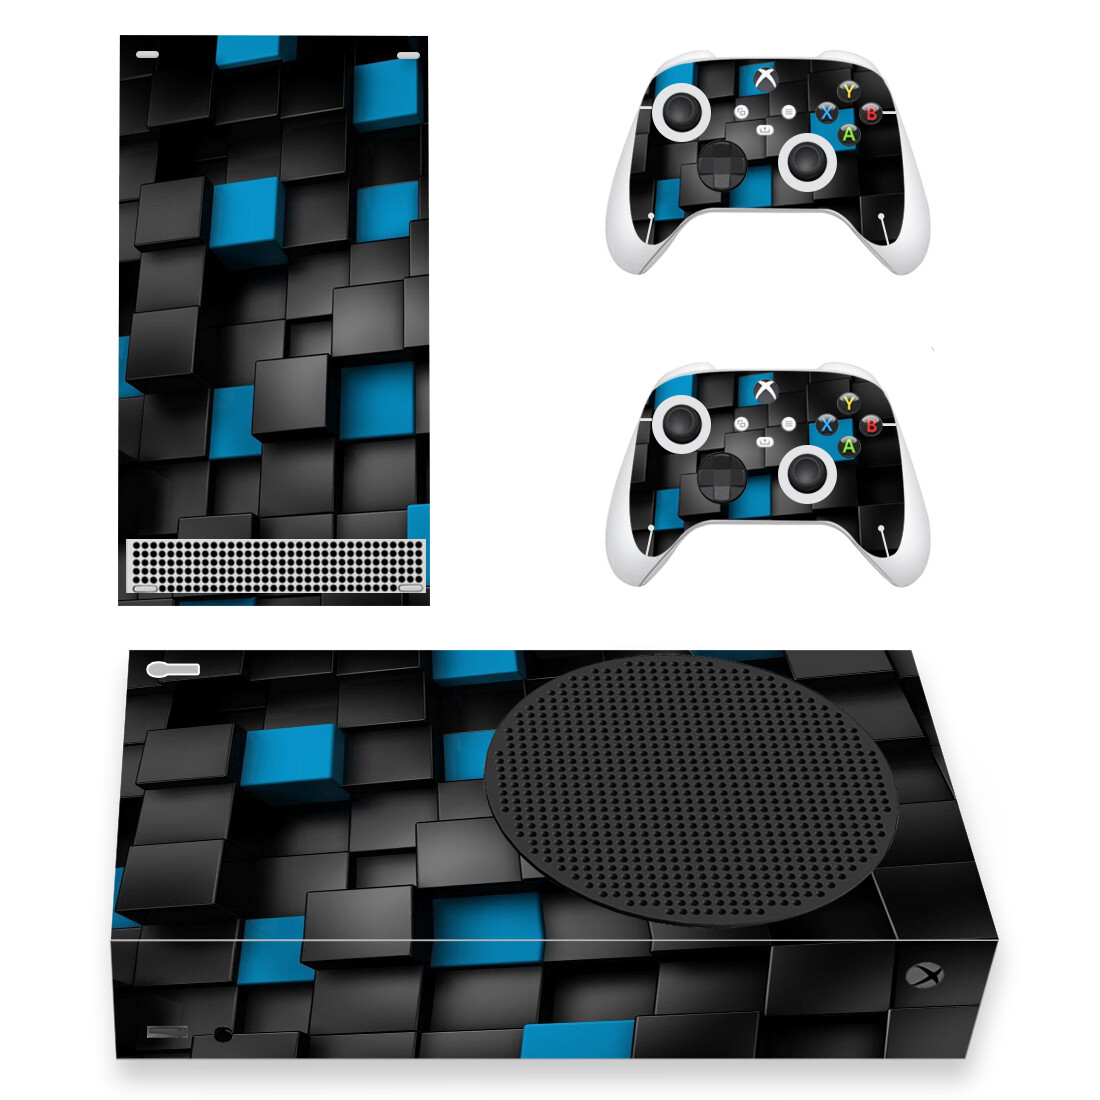 Black And Blue Cubes Wallpaper Xbox Series S Skin Sticker Decal